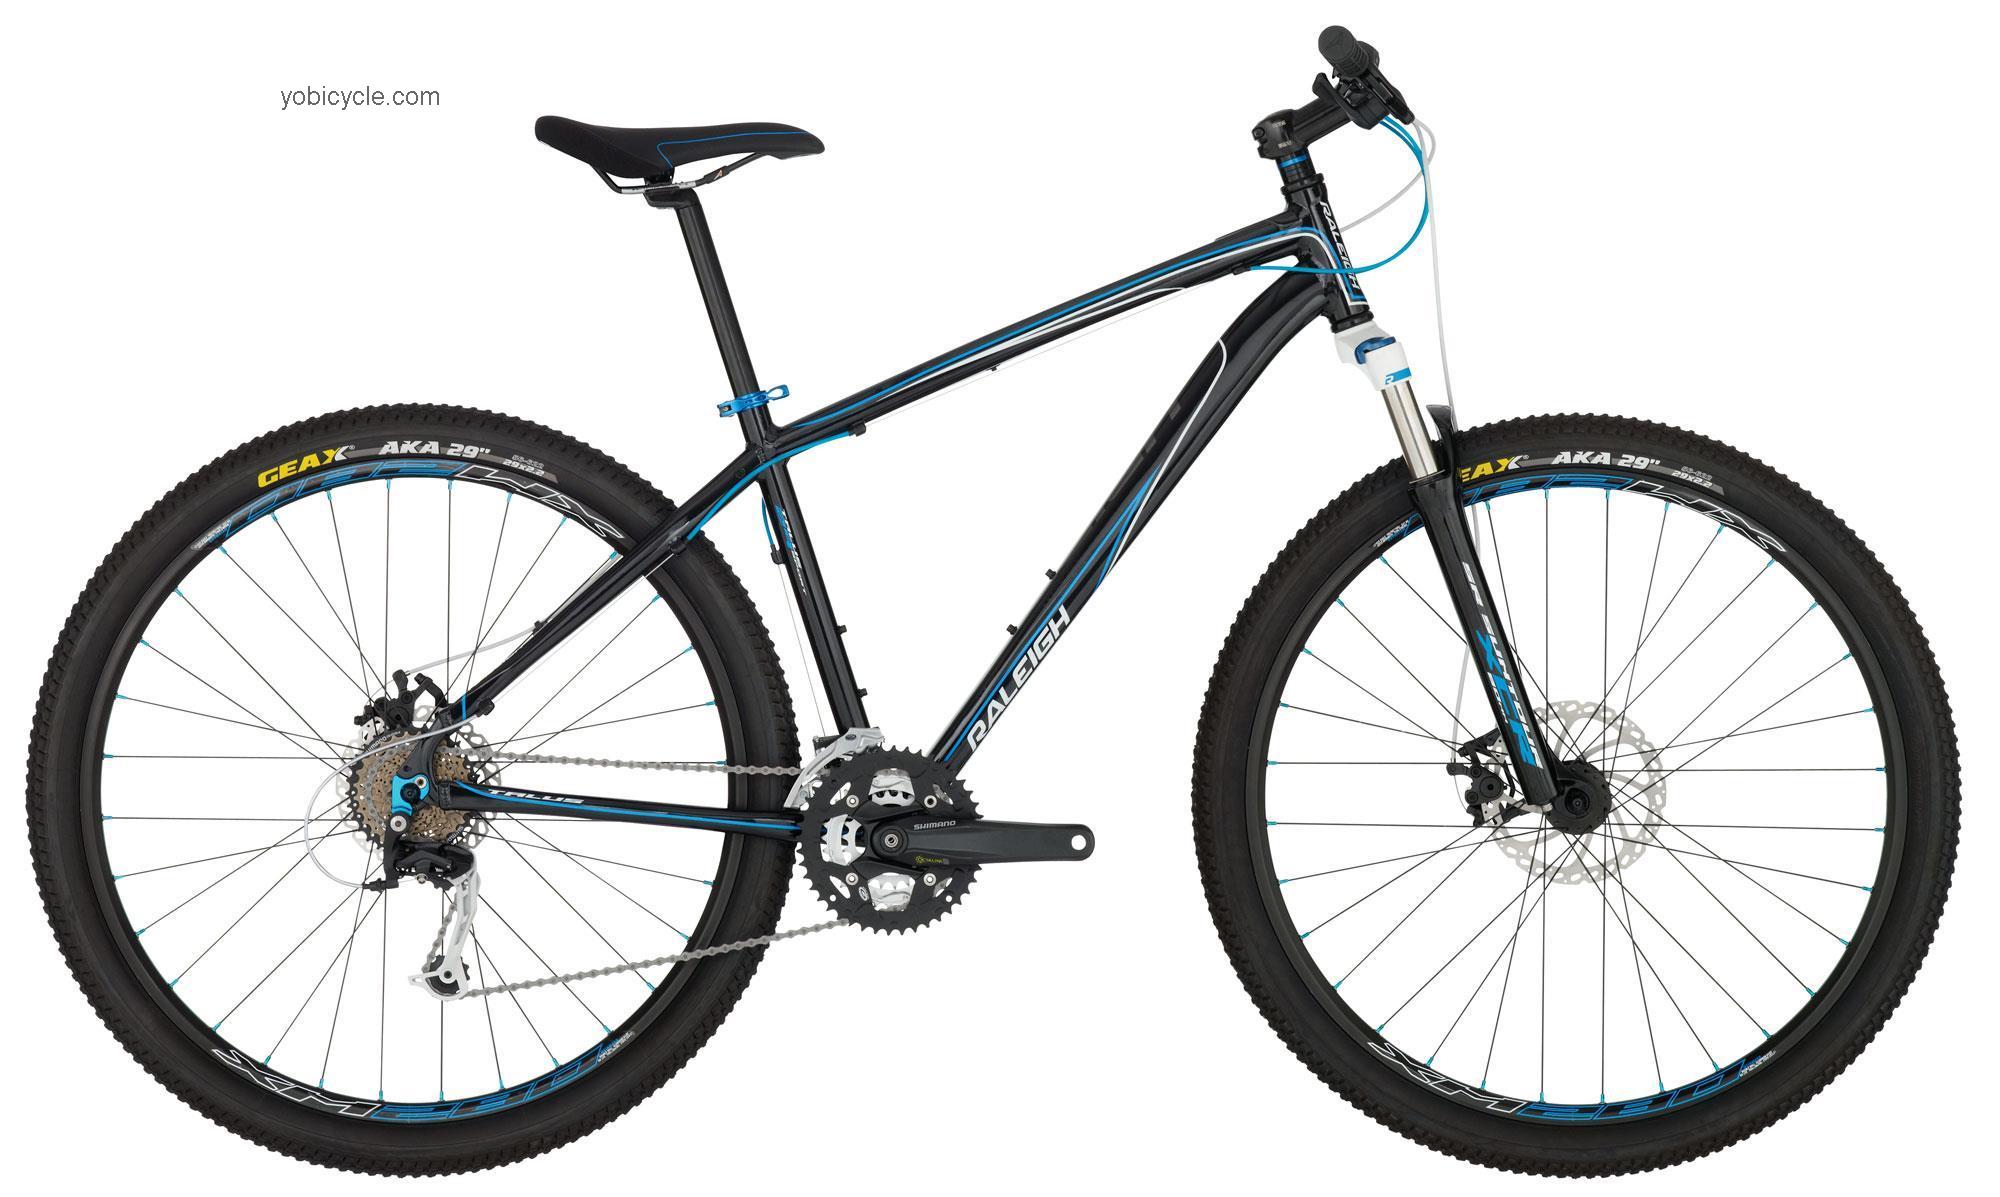 Raleigh Talus 29 Sport 2012 comparison online with competitors